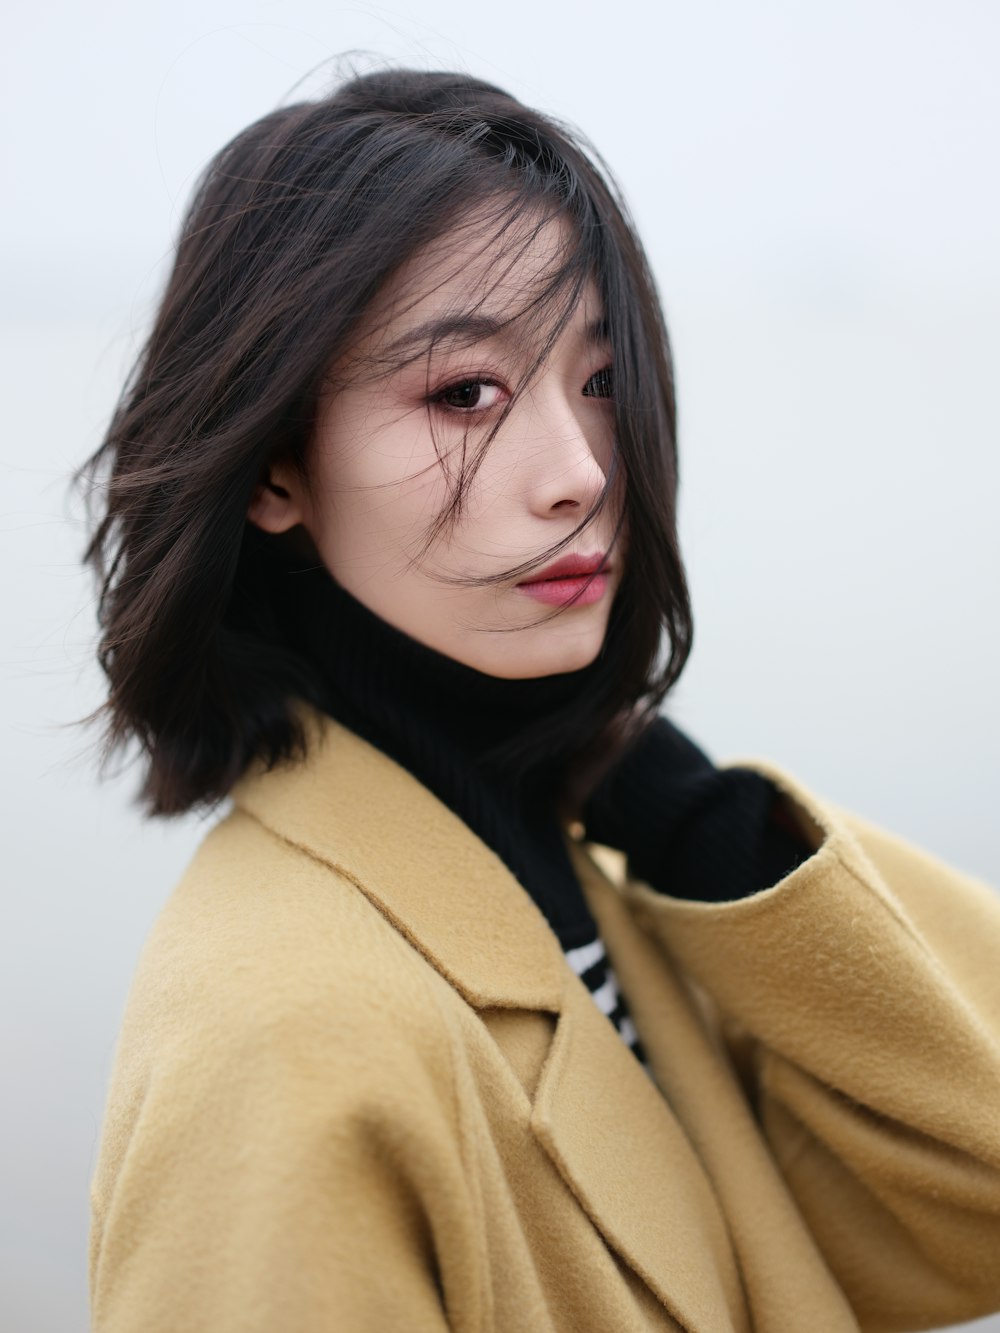 a woman in a yellow coat posing for a picture